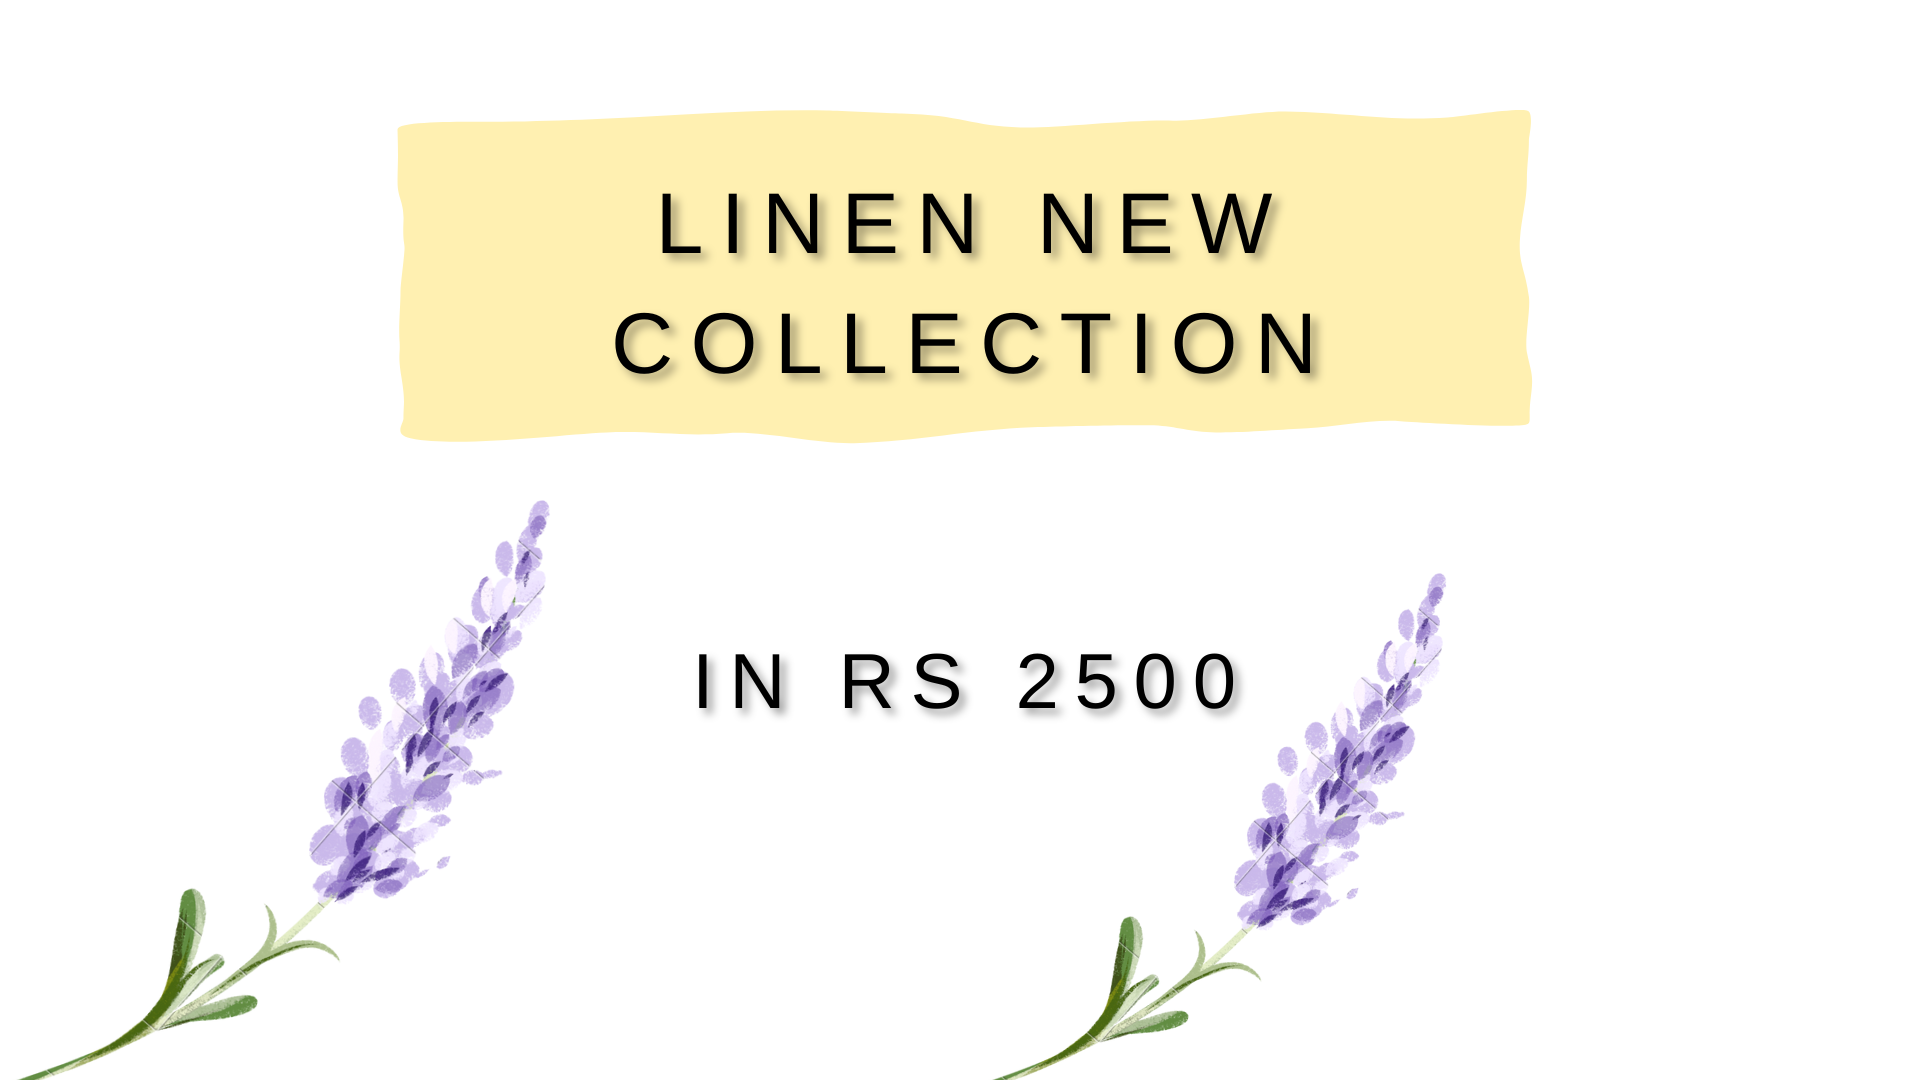 Linen New Arrival in Rs 2500